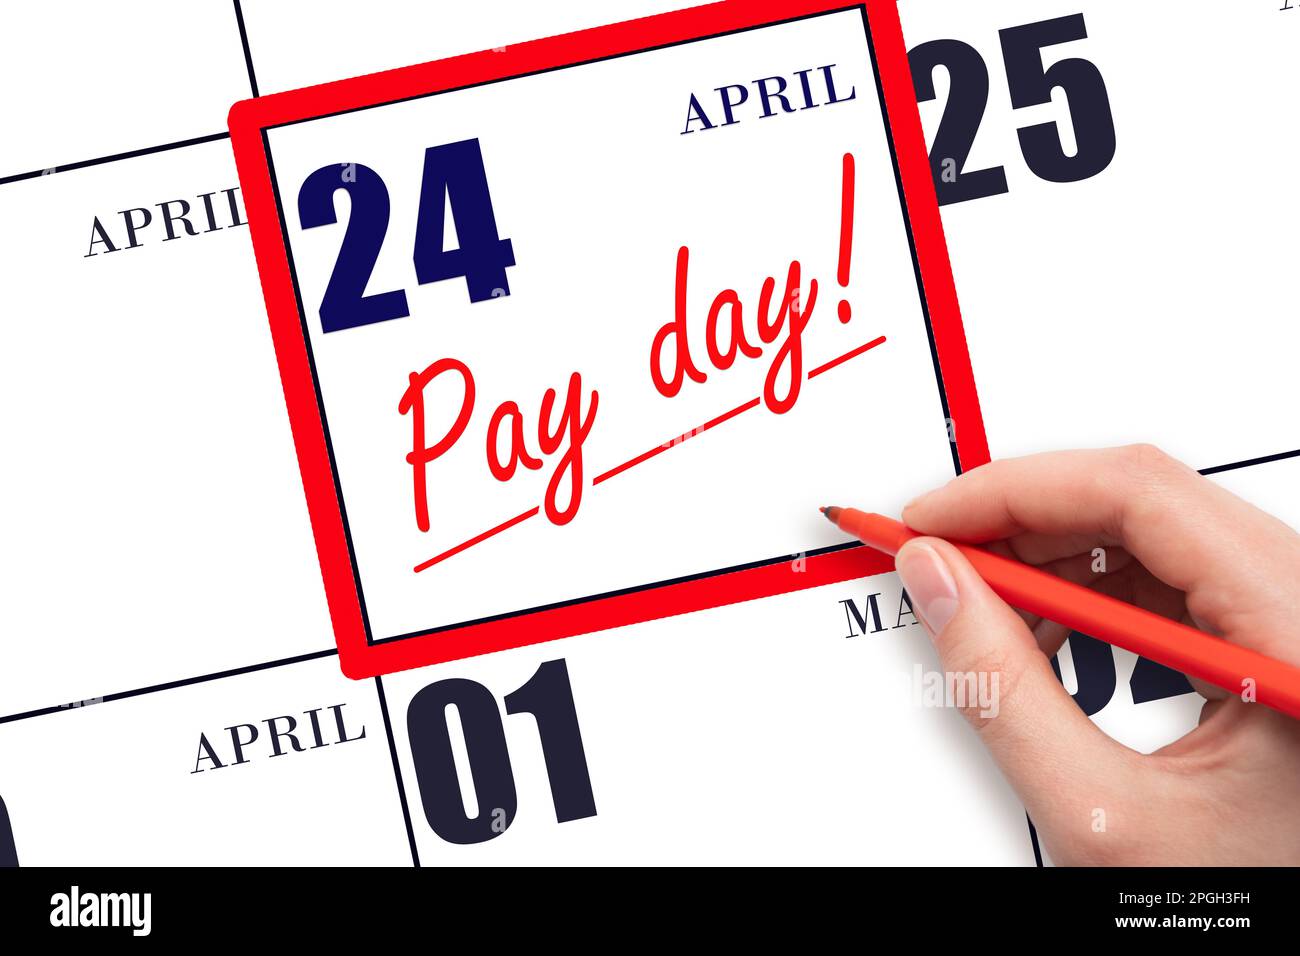 24th day of April. Hand writing text PAY DATE on calendar date April 24 and underline it. Payment due date. Reminder concept of payment. Spring month, Stock Photo